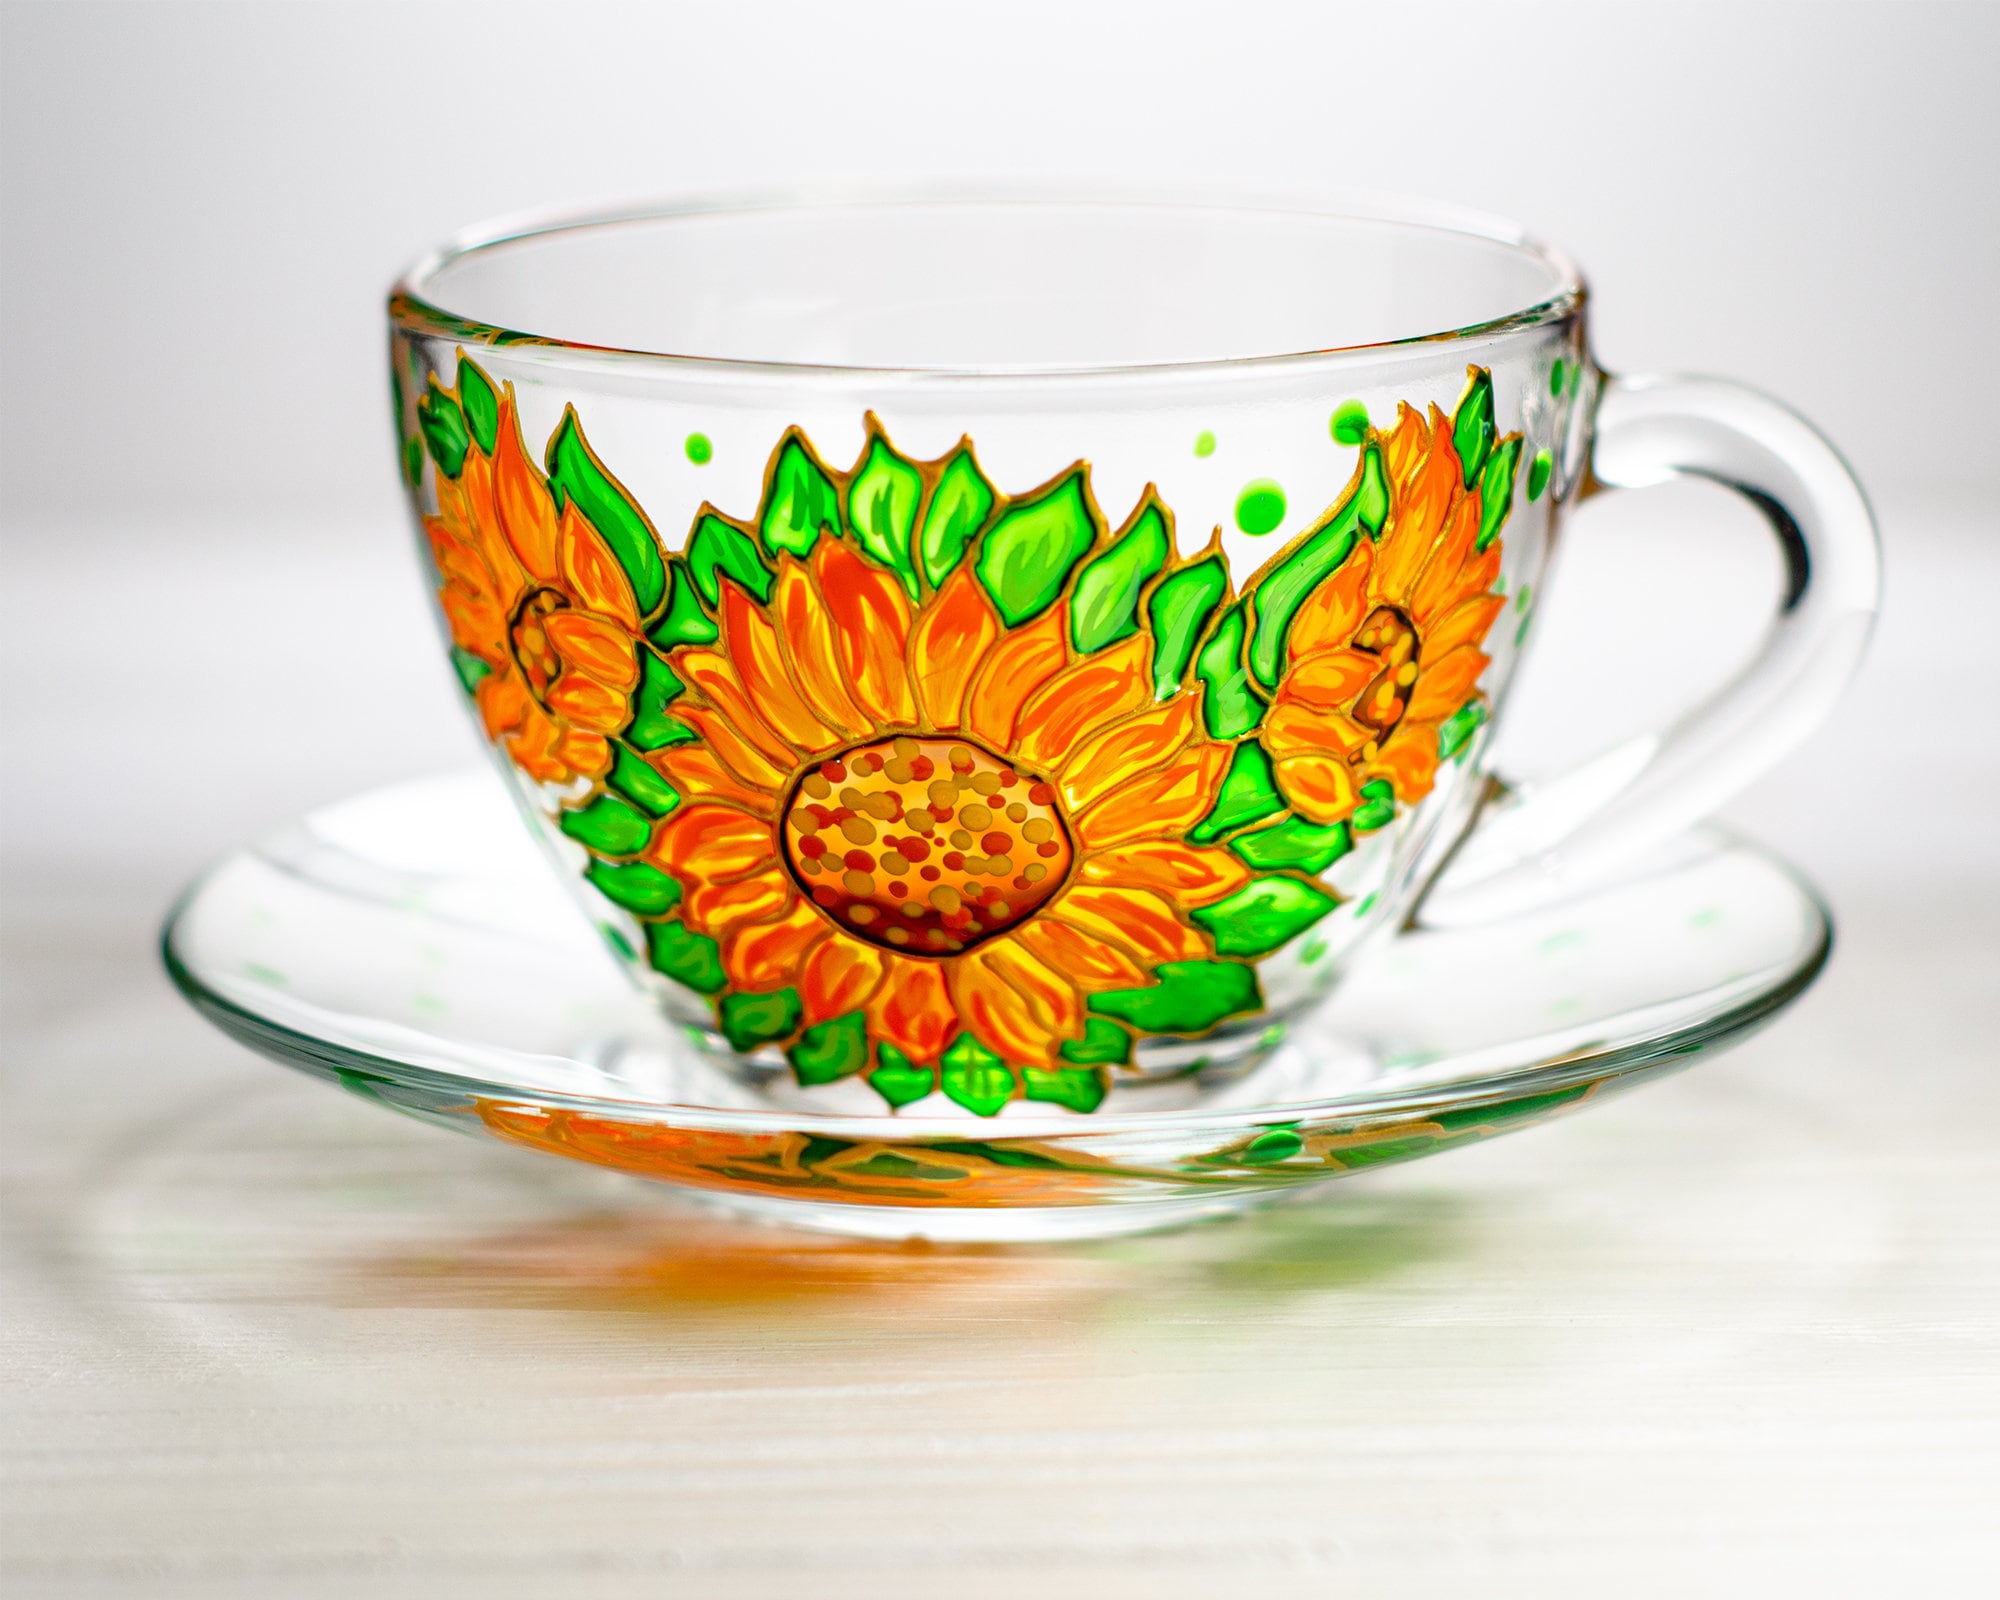 Ceramic Sunflower Coffee Cup and Saucer Set Creative Gift